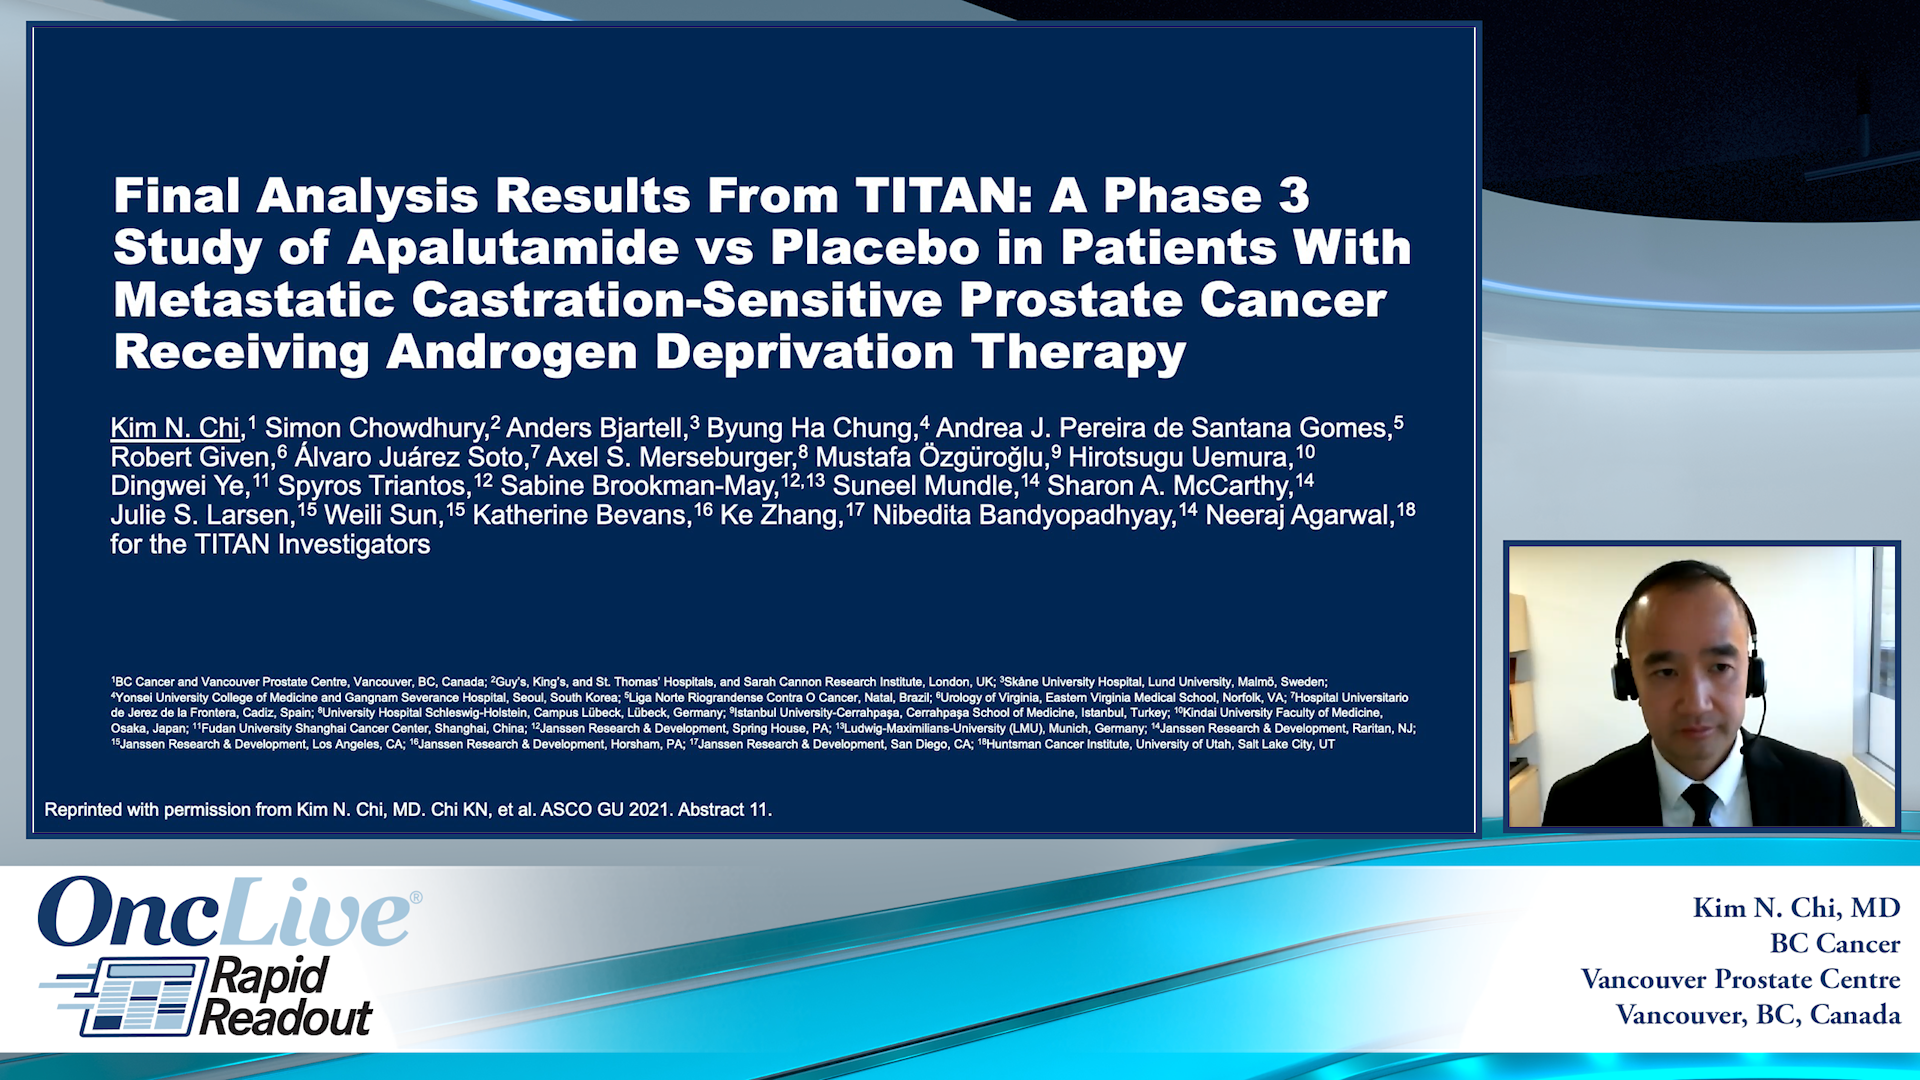 Rapid Readouts: Final Analysis Results From the Phase 3 TITAN Study